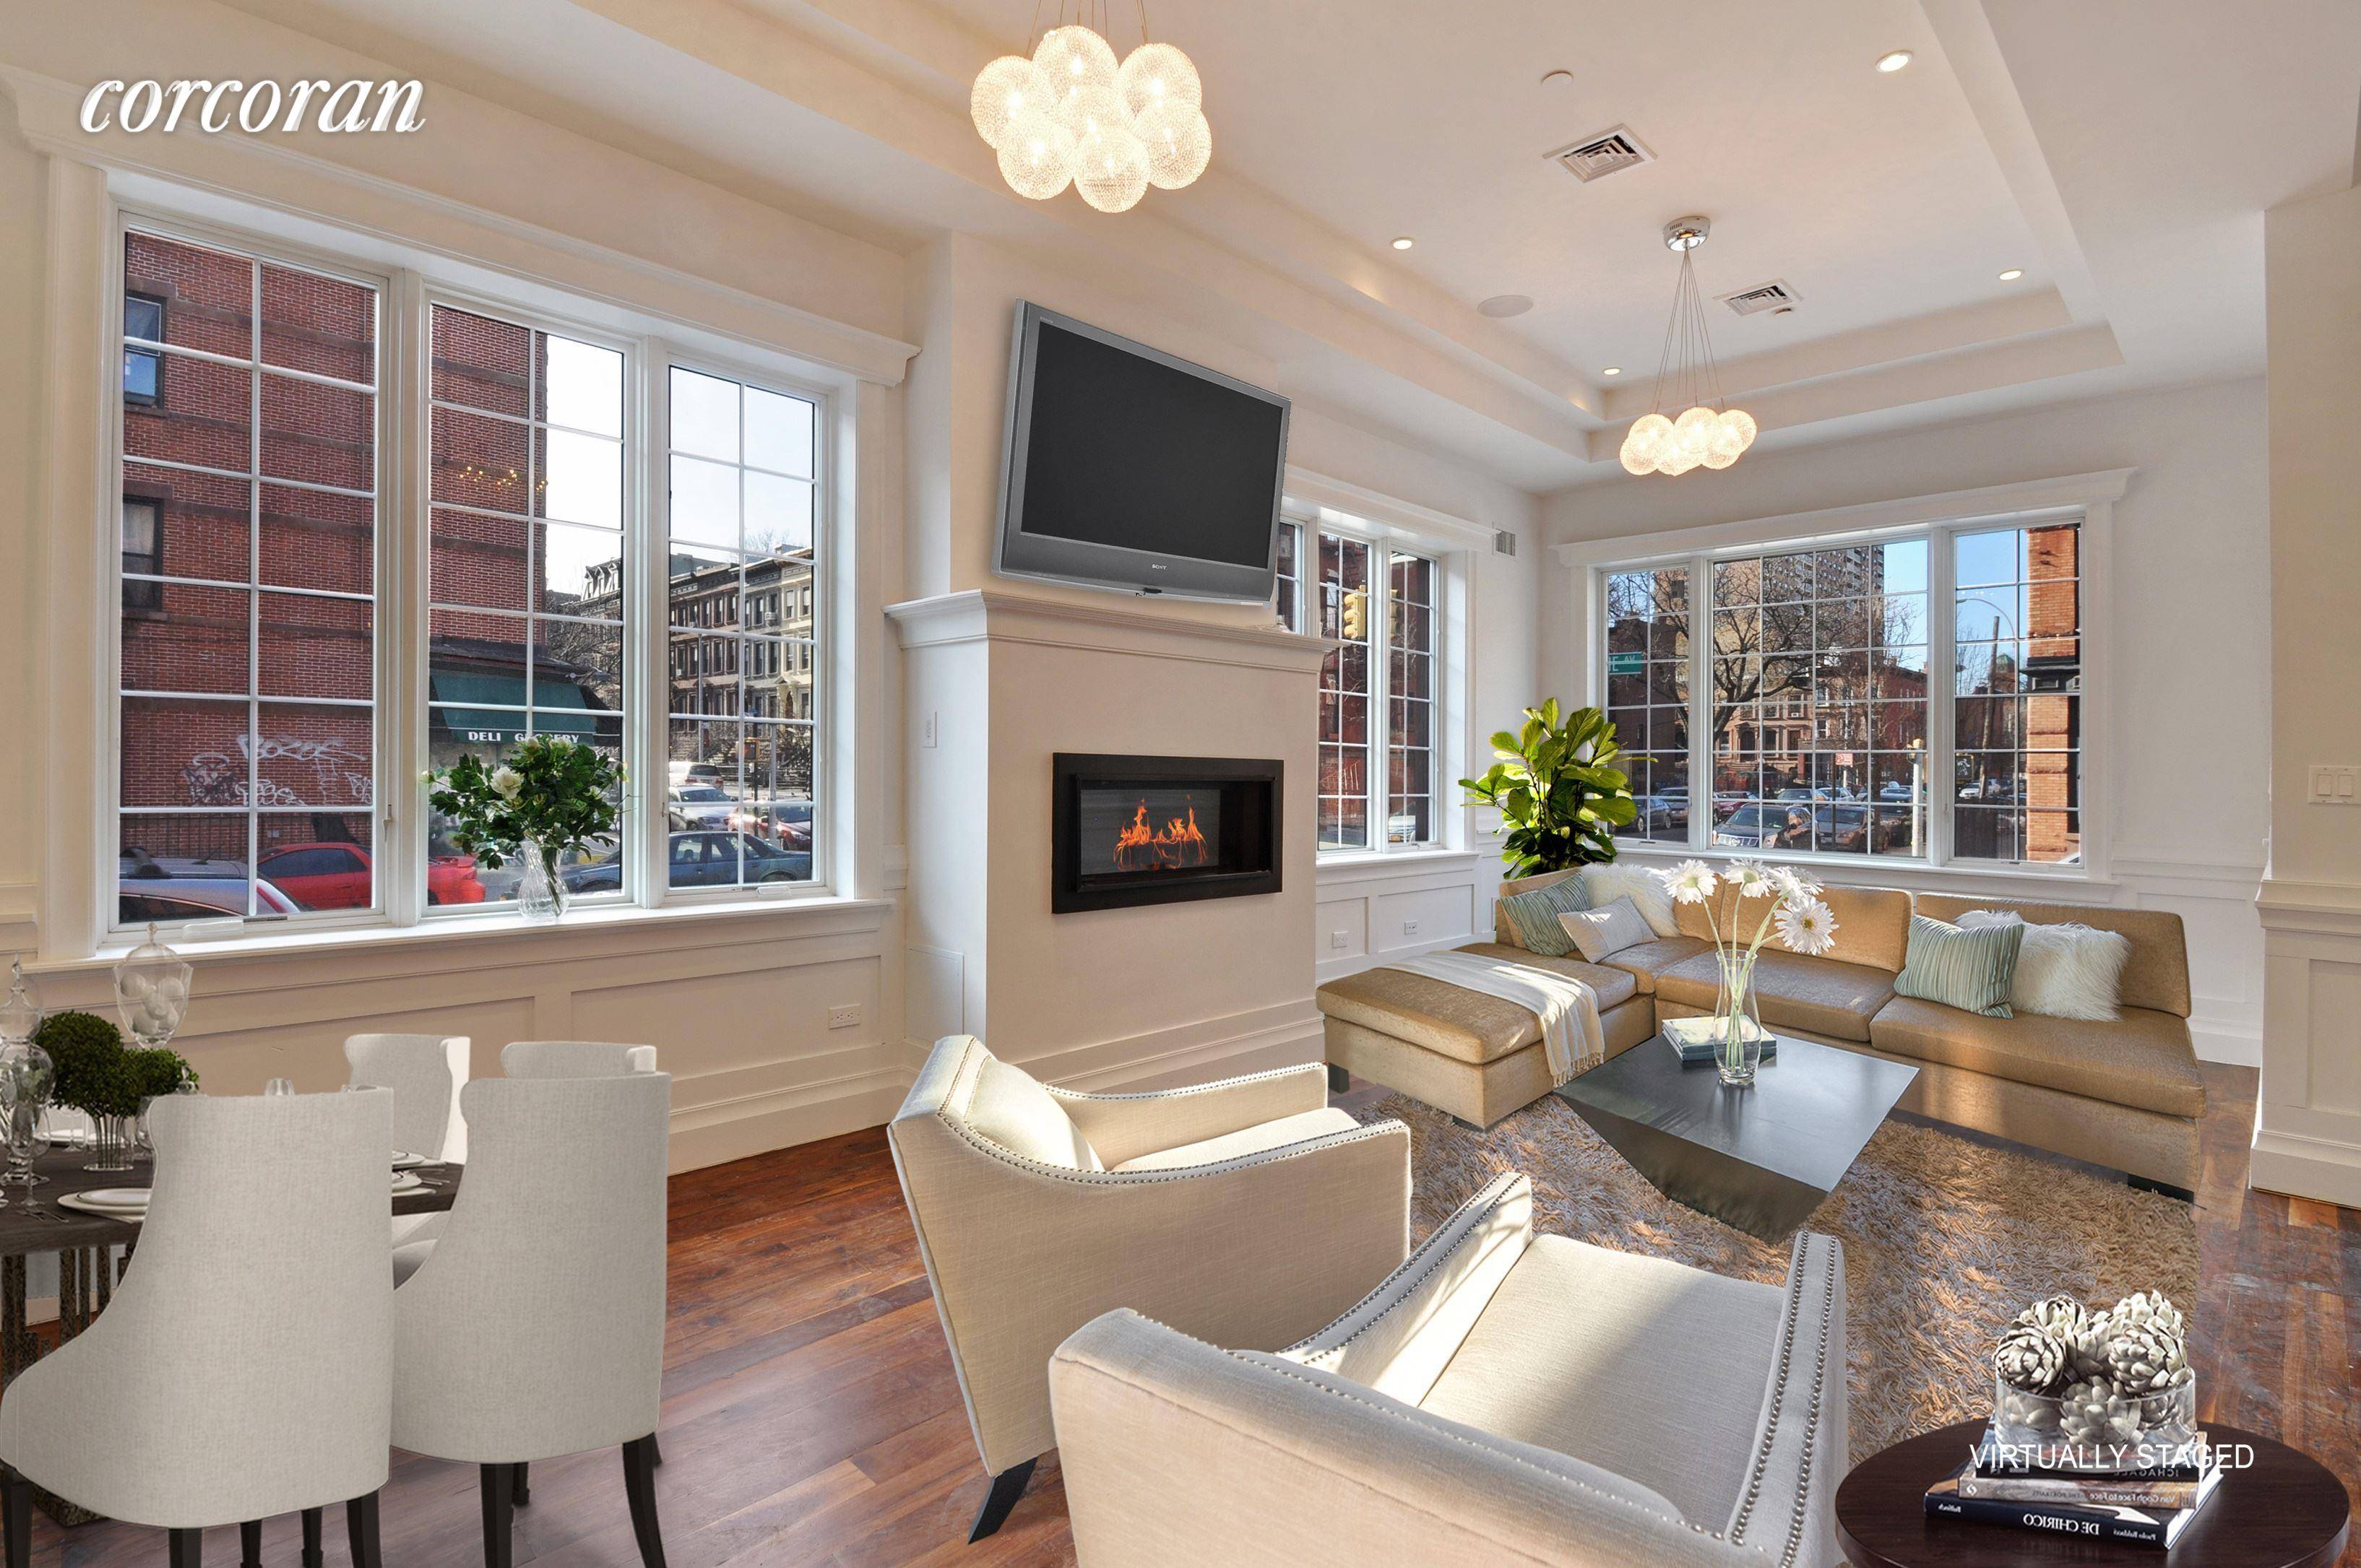 This beautiful, sun filled and eye catching corner property in Clinton Hill is just waiting to be called home for an astute, saavy buyer or investor.